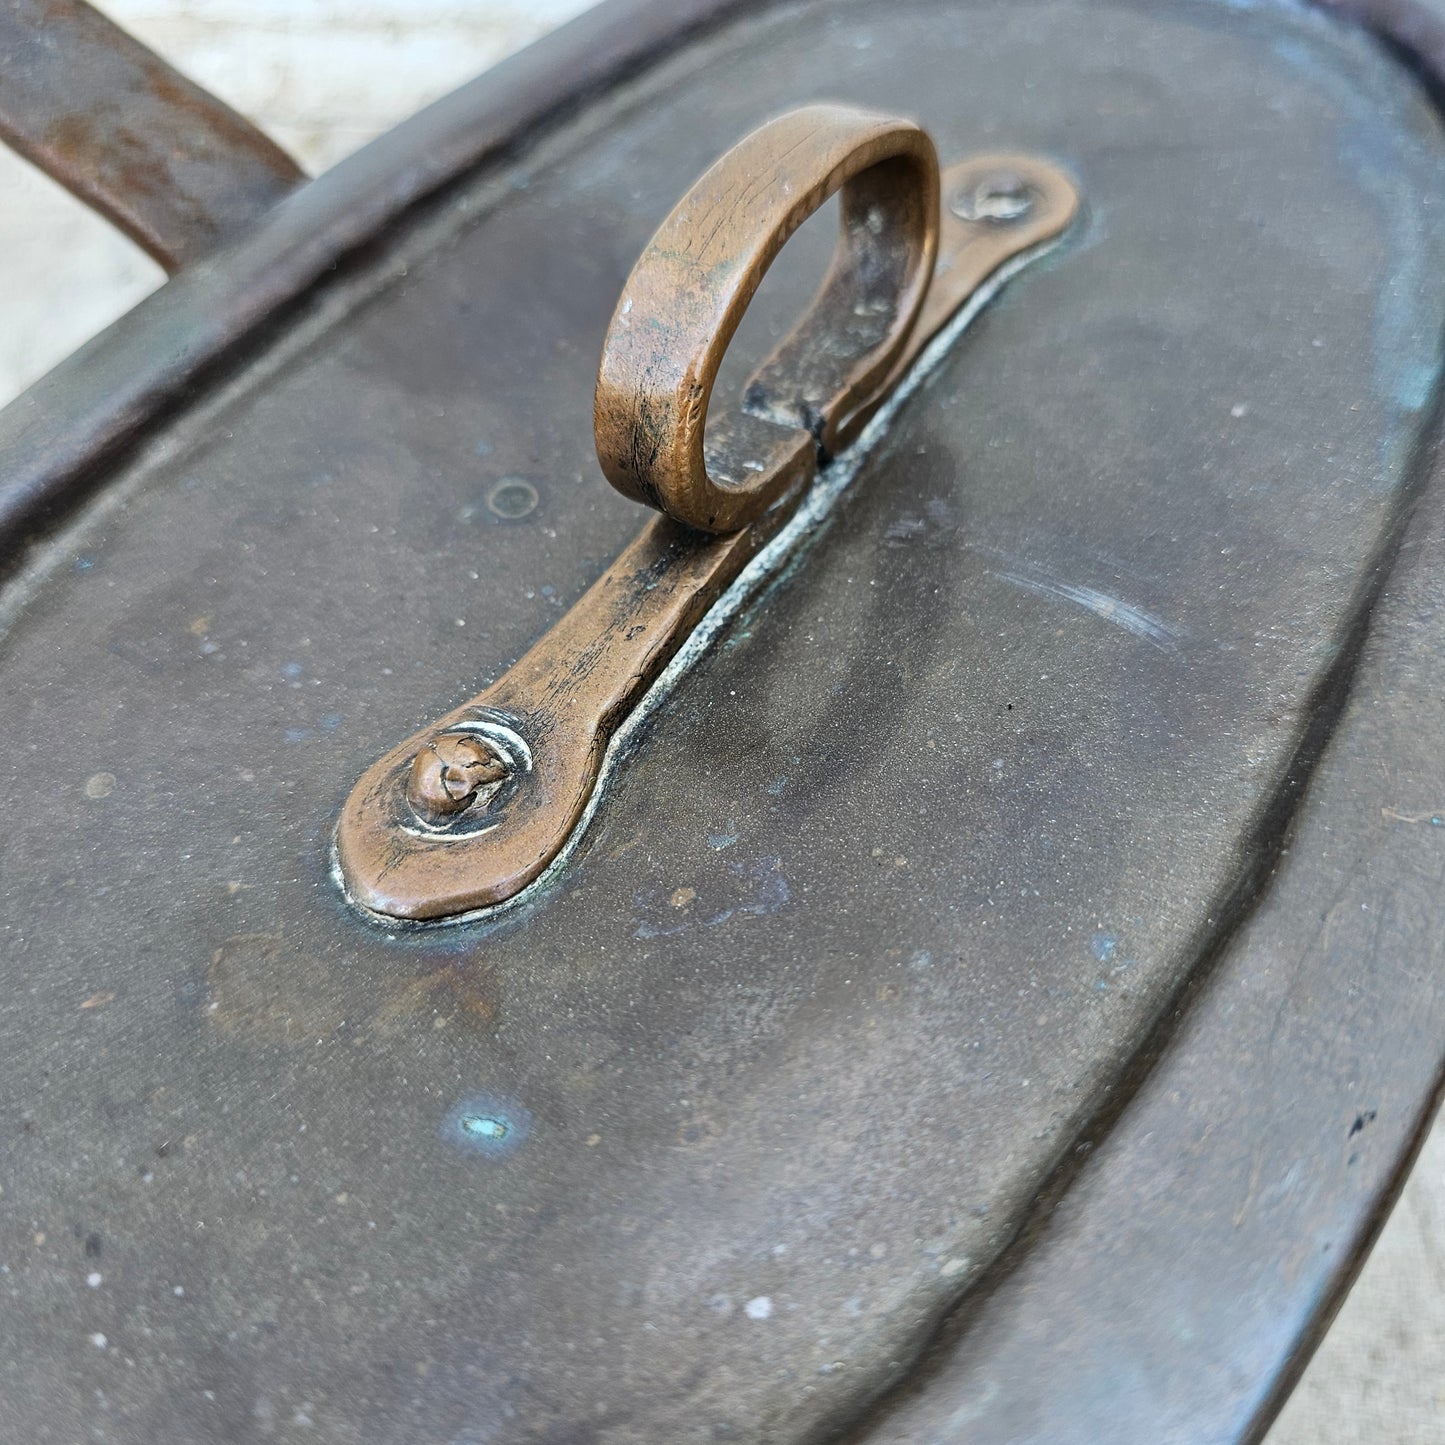 Antique French Copper Covered Pan